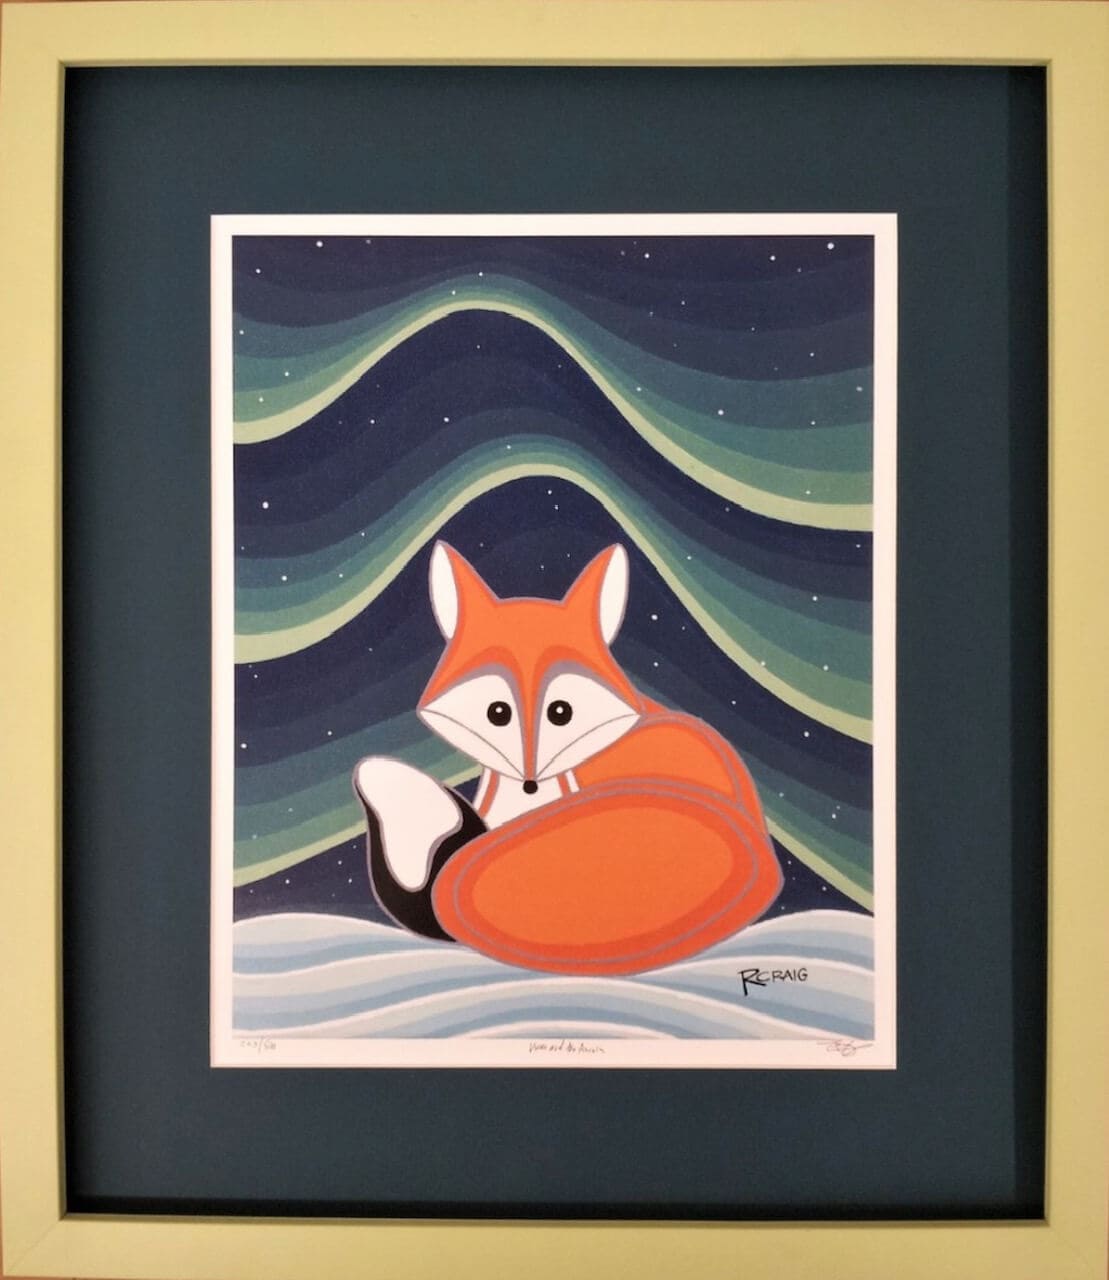 A framed print of a fox in the snow.